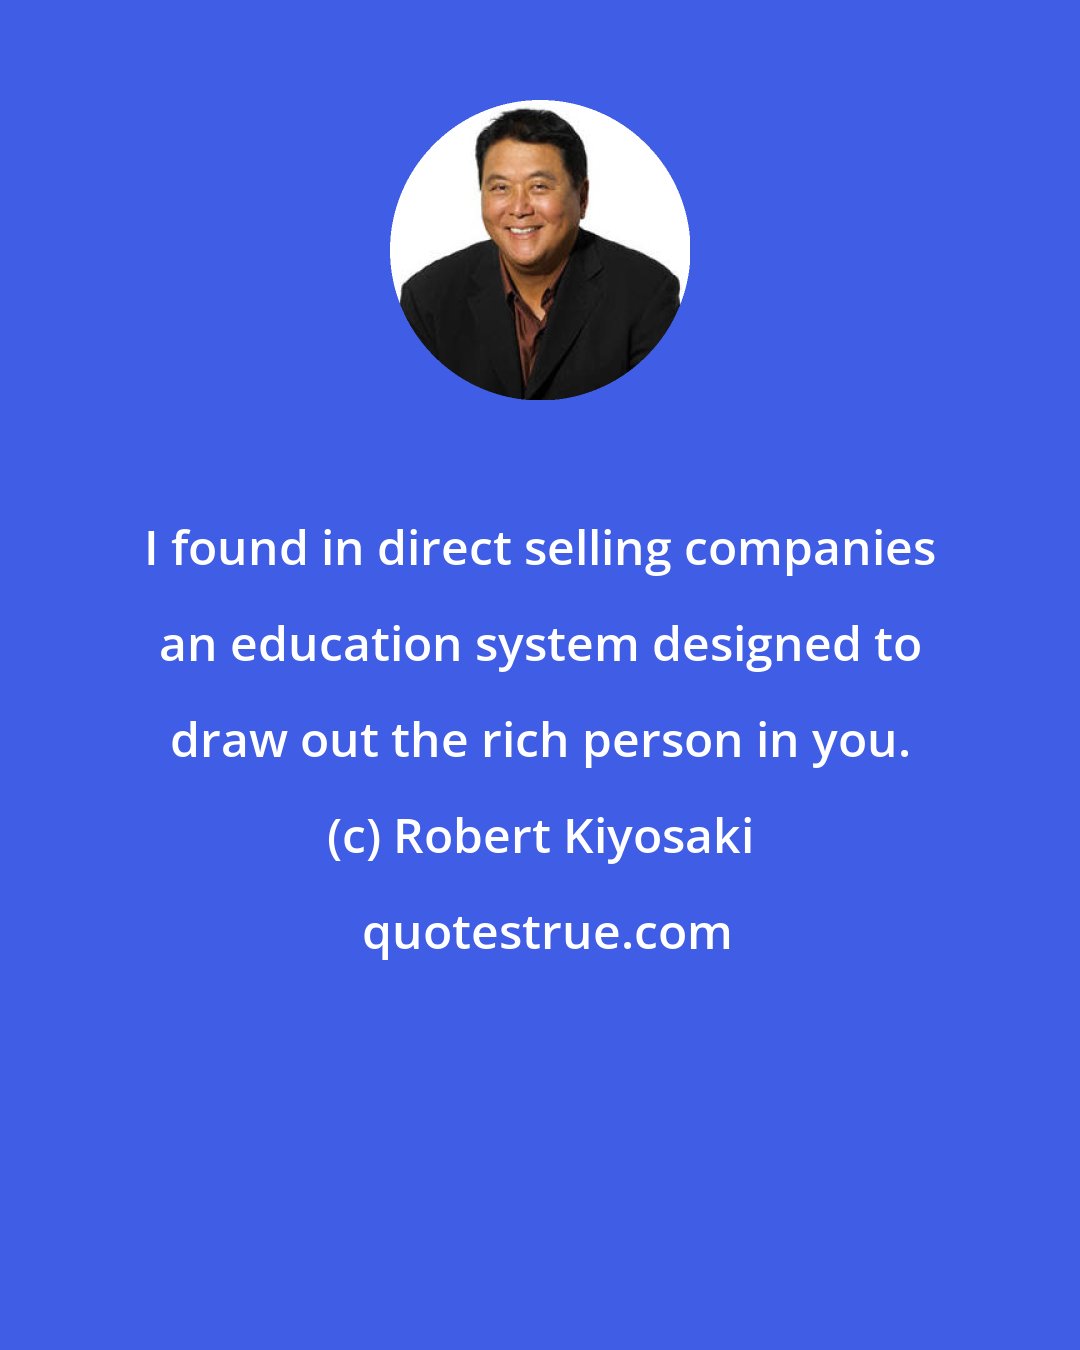 Robert Kiyosaki: I found in direct selling companies an education system designed to draw out the rich person in you.